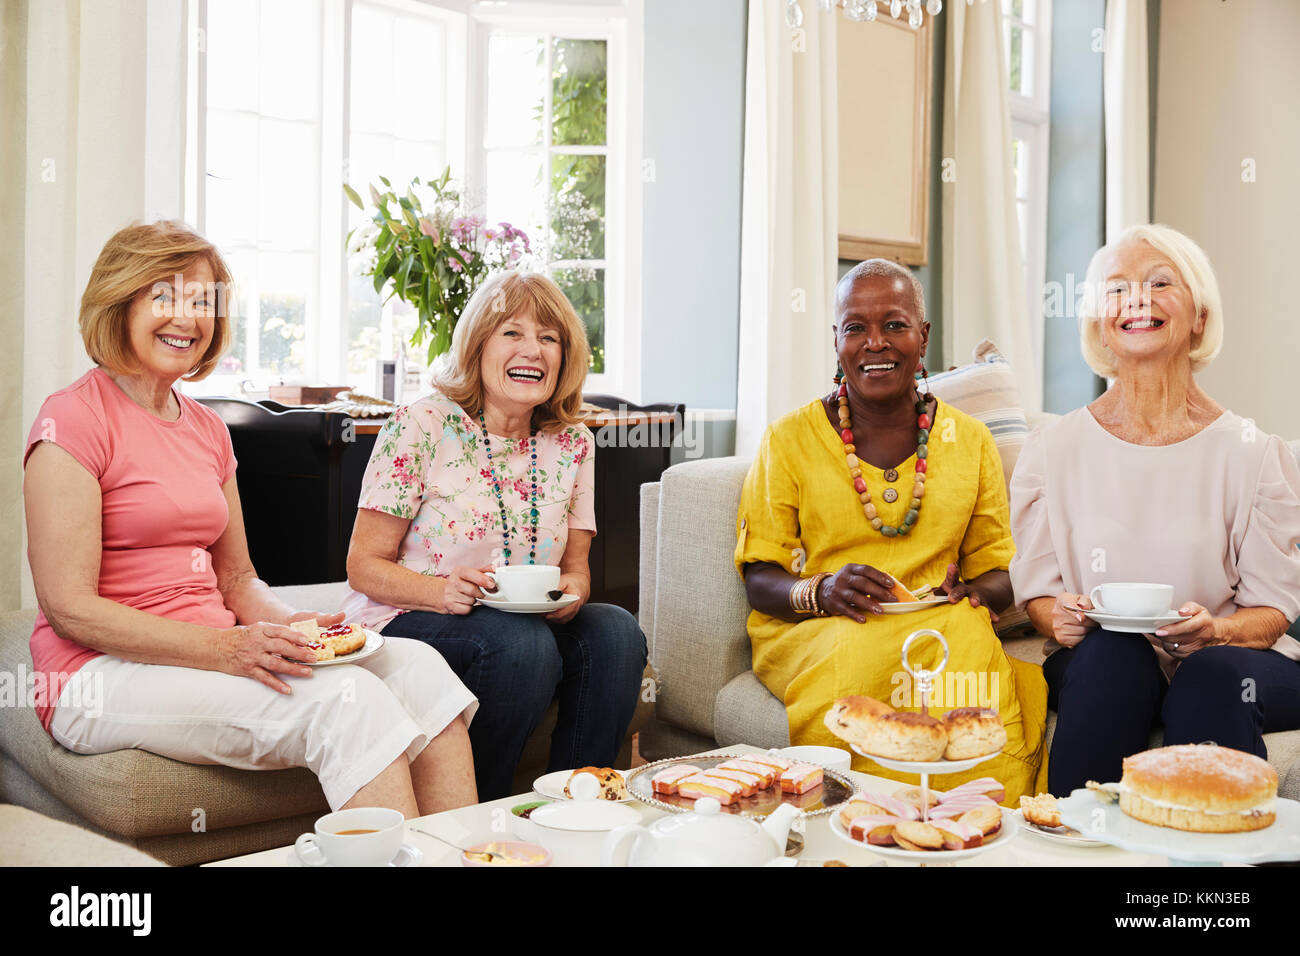 Portrait Of Senior Female Friends Enjoying Afternoon Tea At Home Stock Photo